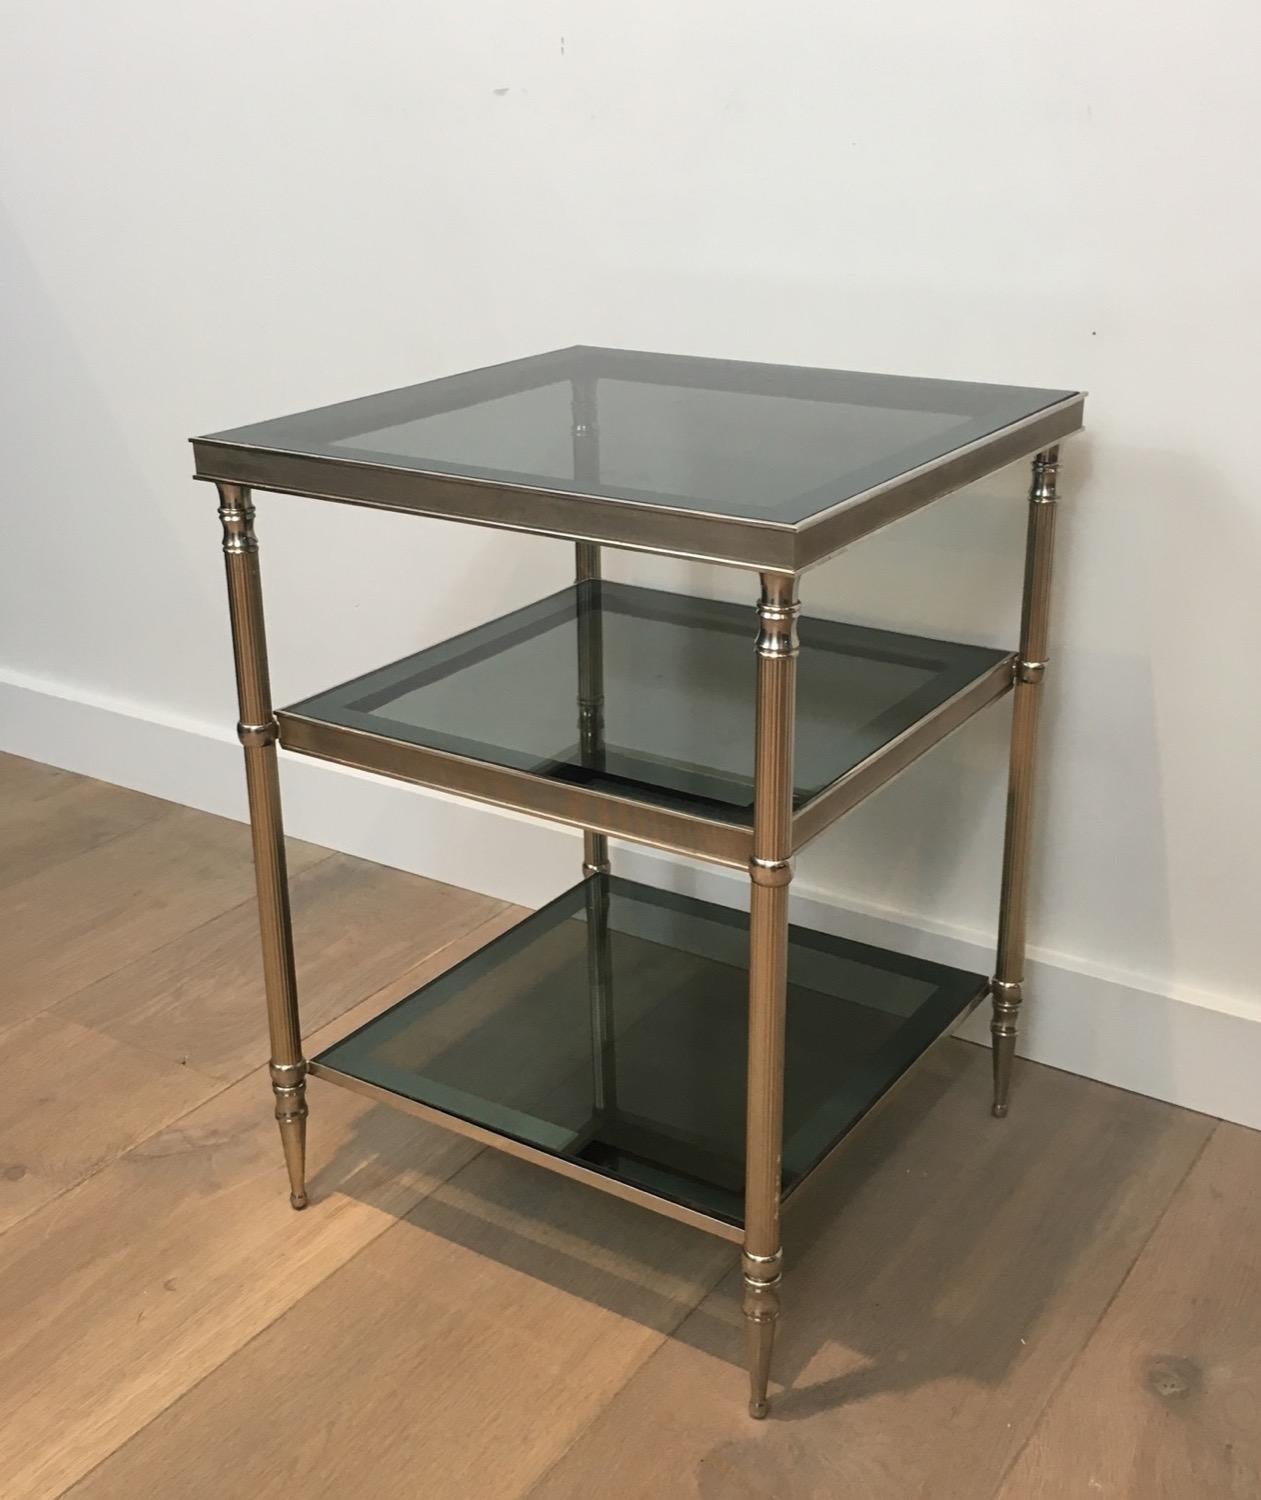 Pair of Silvered Side Tables with Blueish Glass Top, Attributed to Maison Jansen (Mitte des 20. Jahrhunderts)